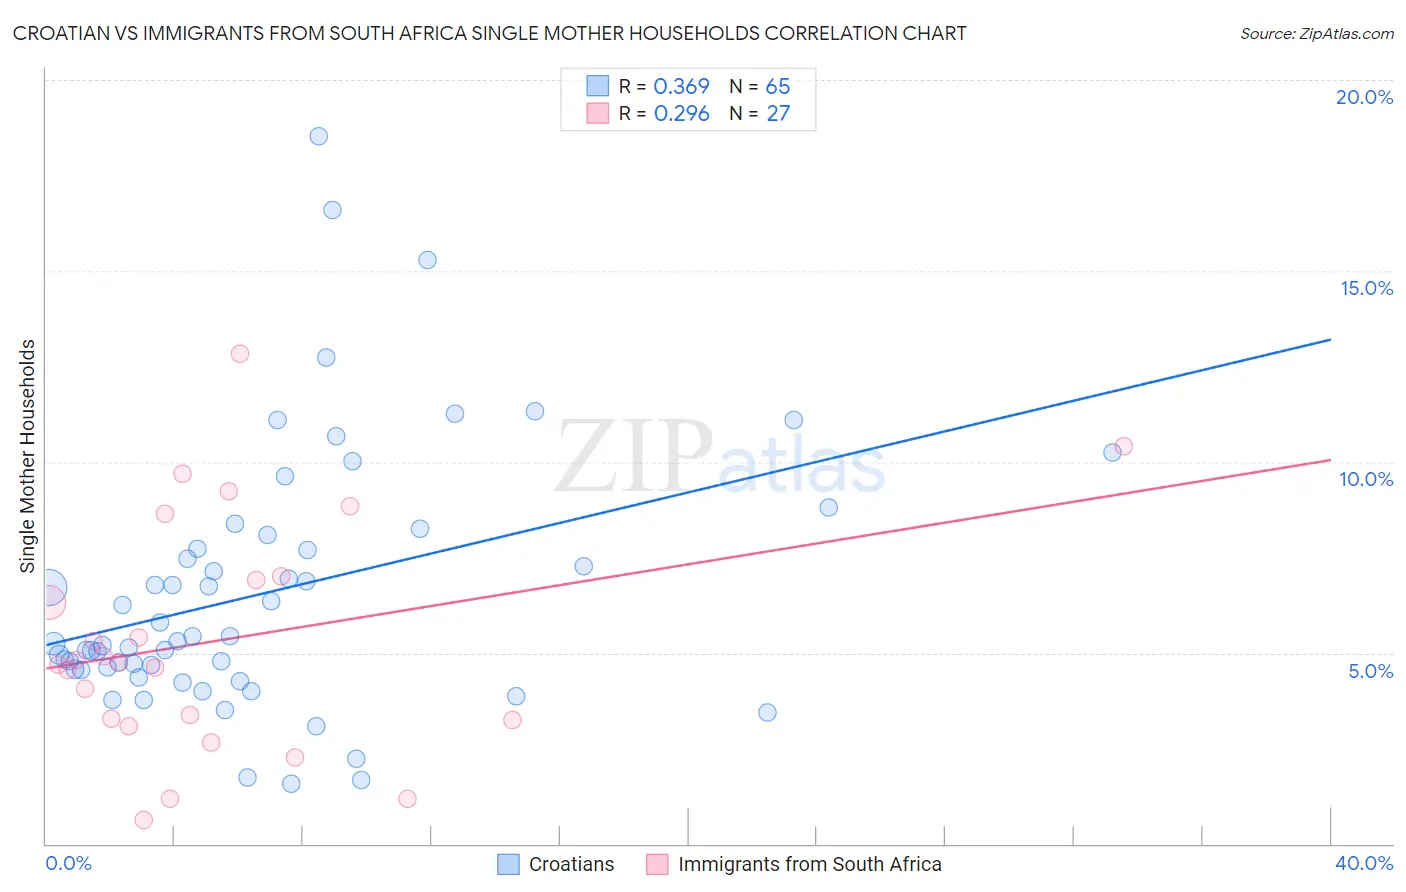 Croatian vs Immigrants from South Africa Single Mother Households